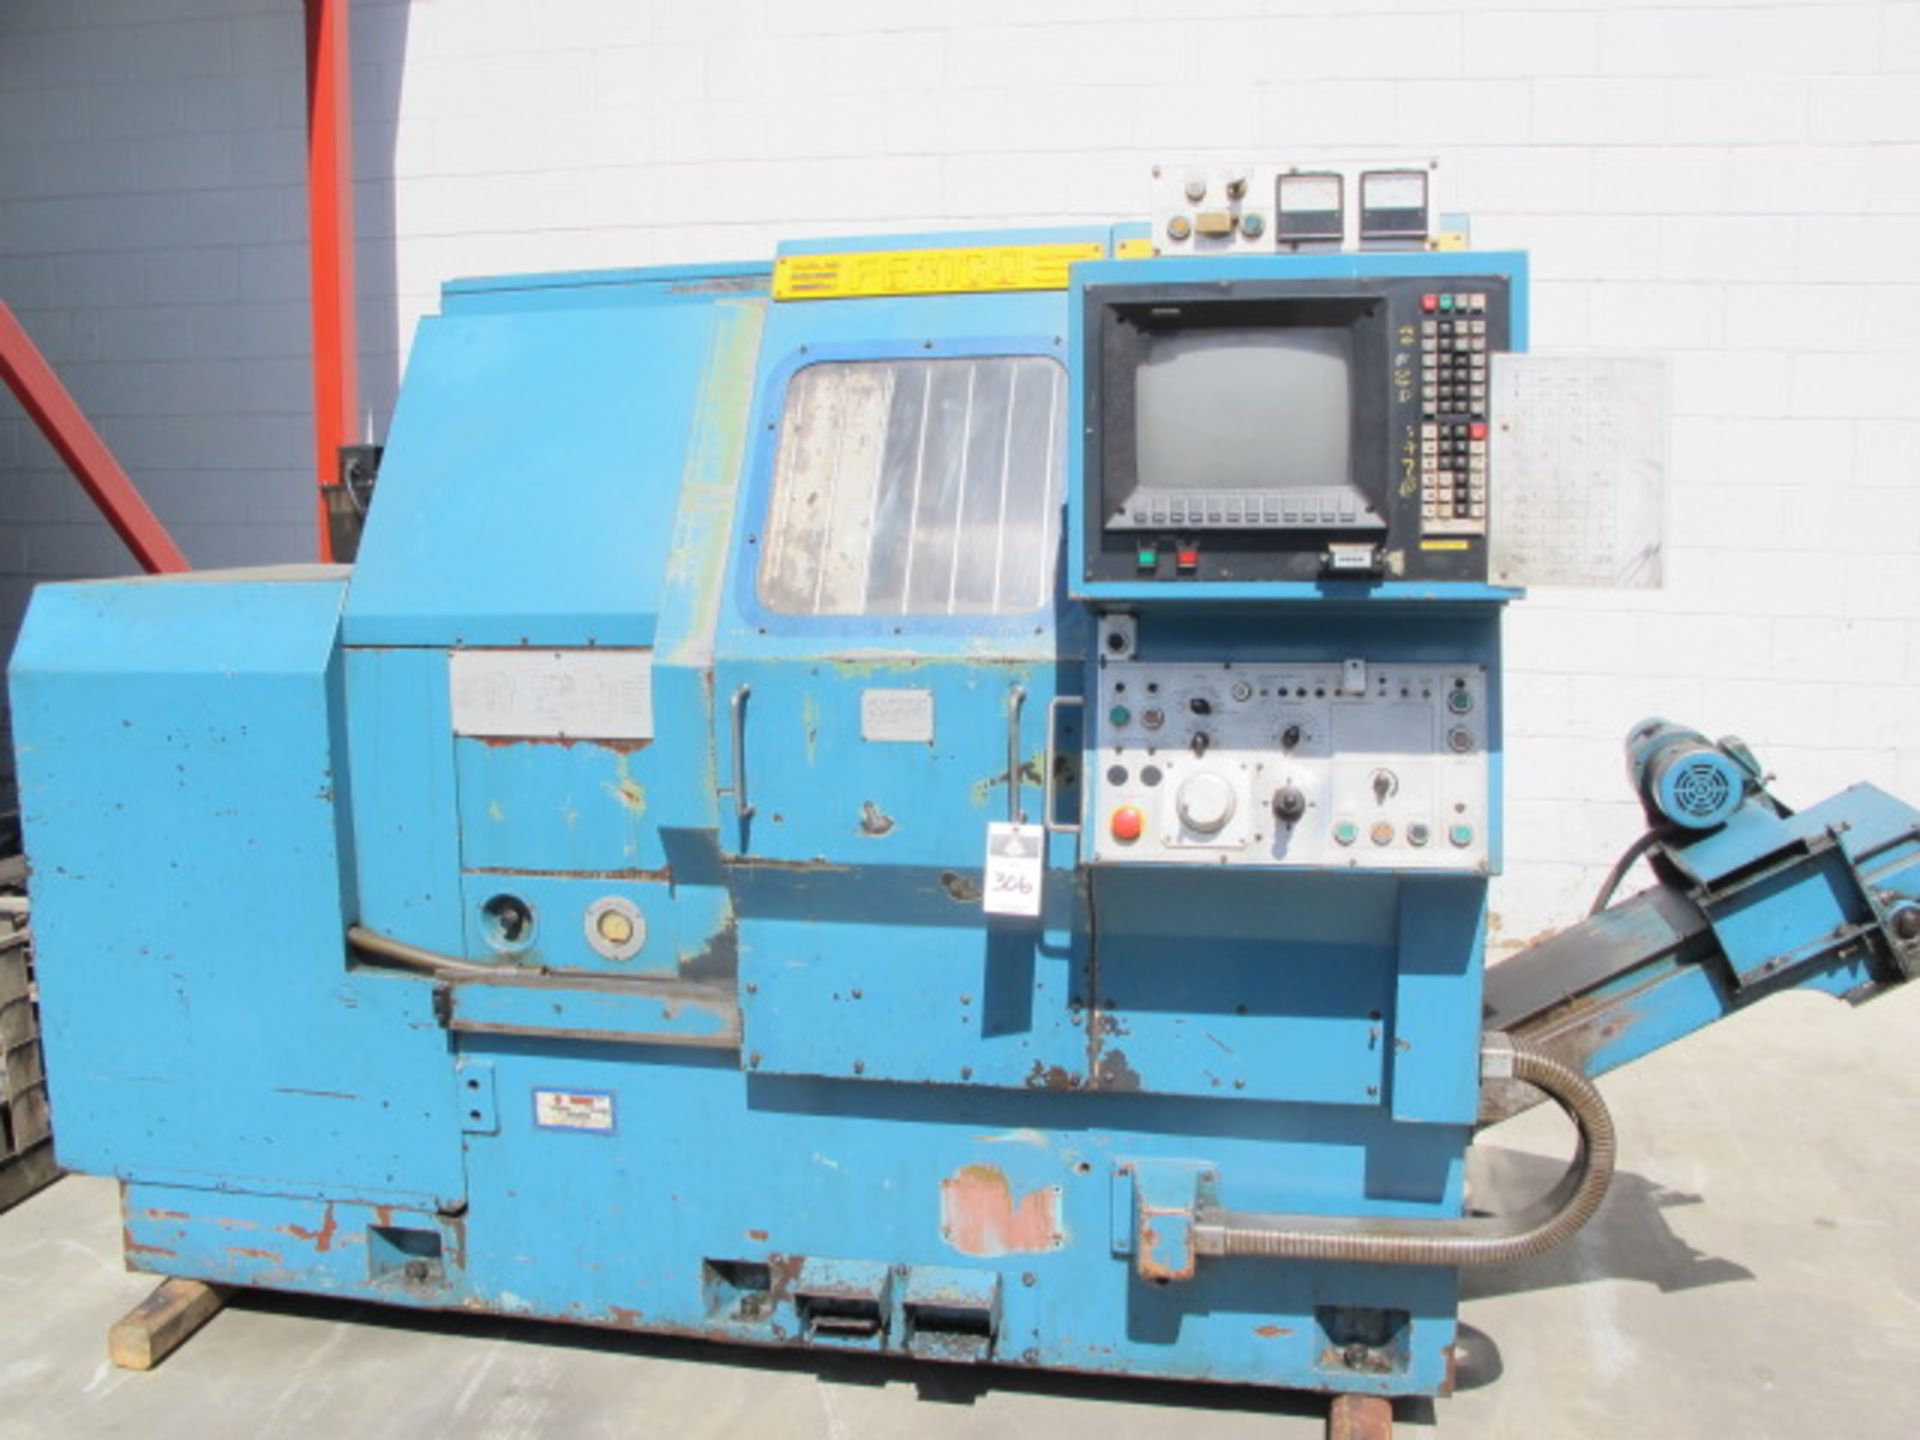 Femco WNCL-10/25 CNC Turning Center s/n 2001 w/ Fanuc System 10T Controls, 12-Station Turret, 5C